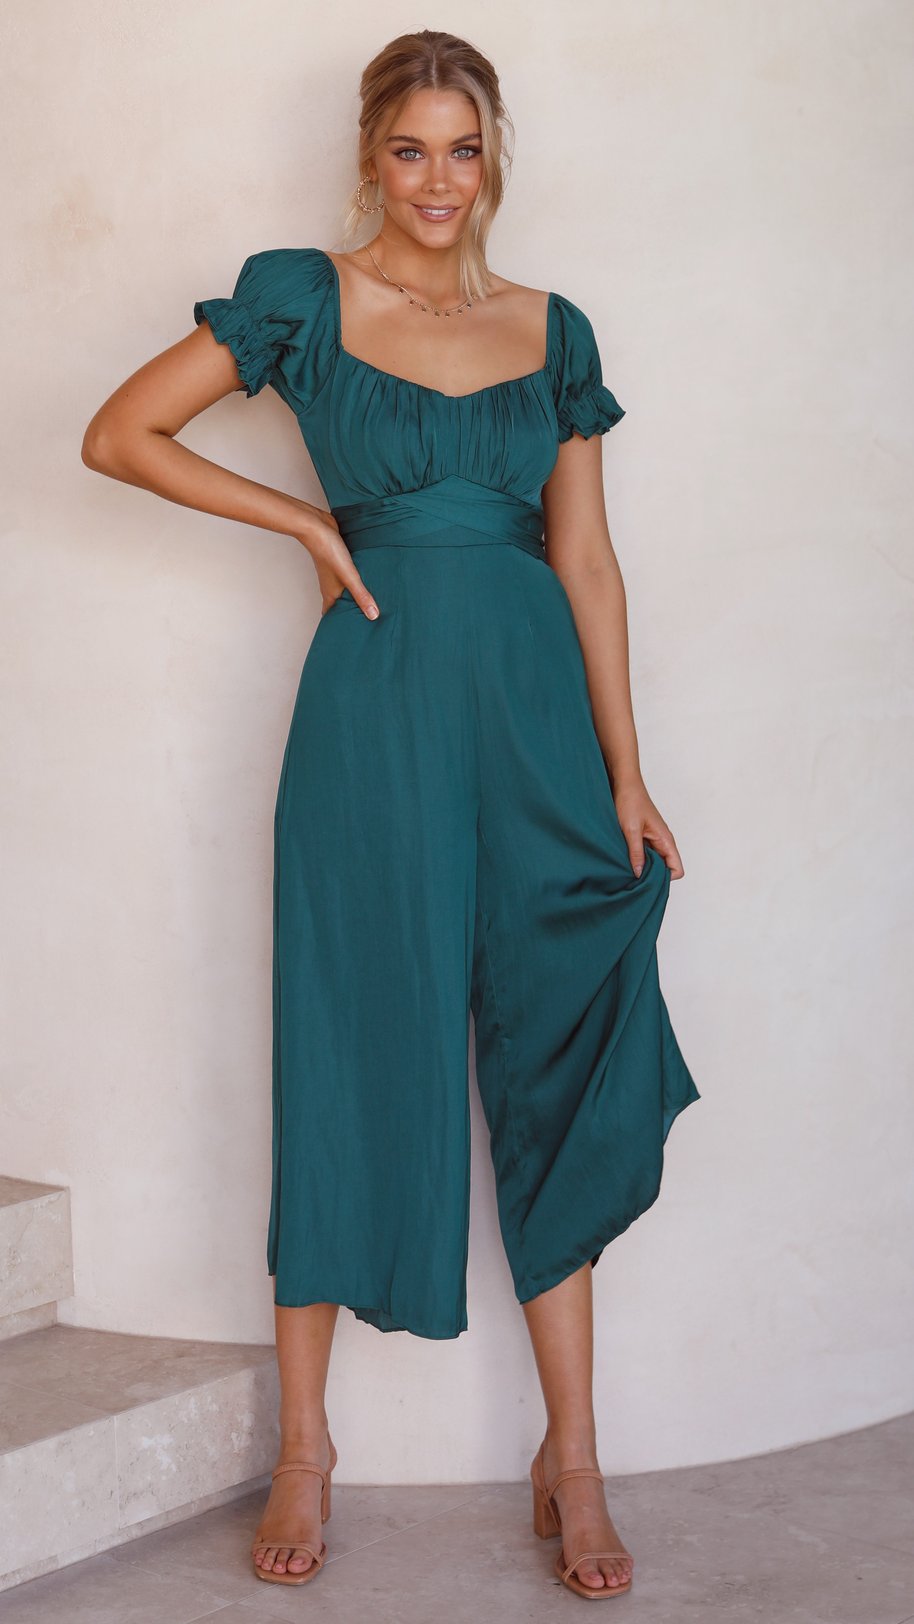 How to choose the perfect jumpsuit for a wedding?